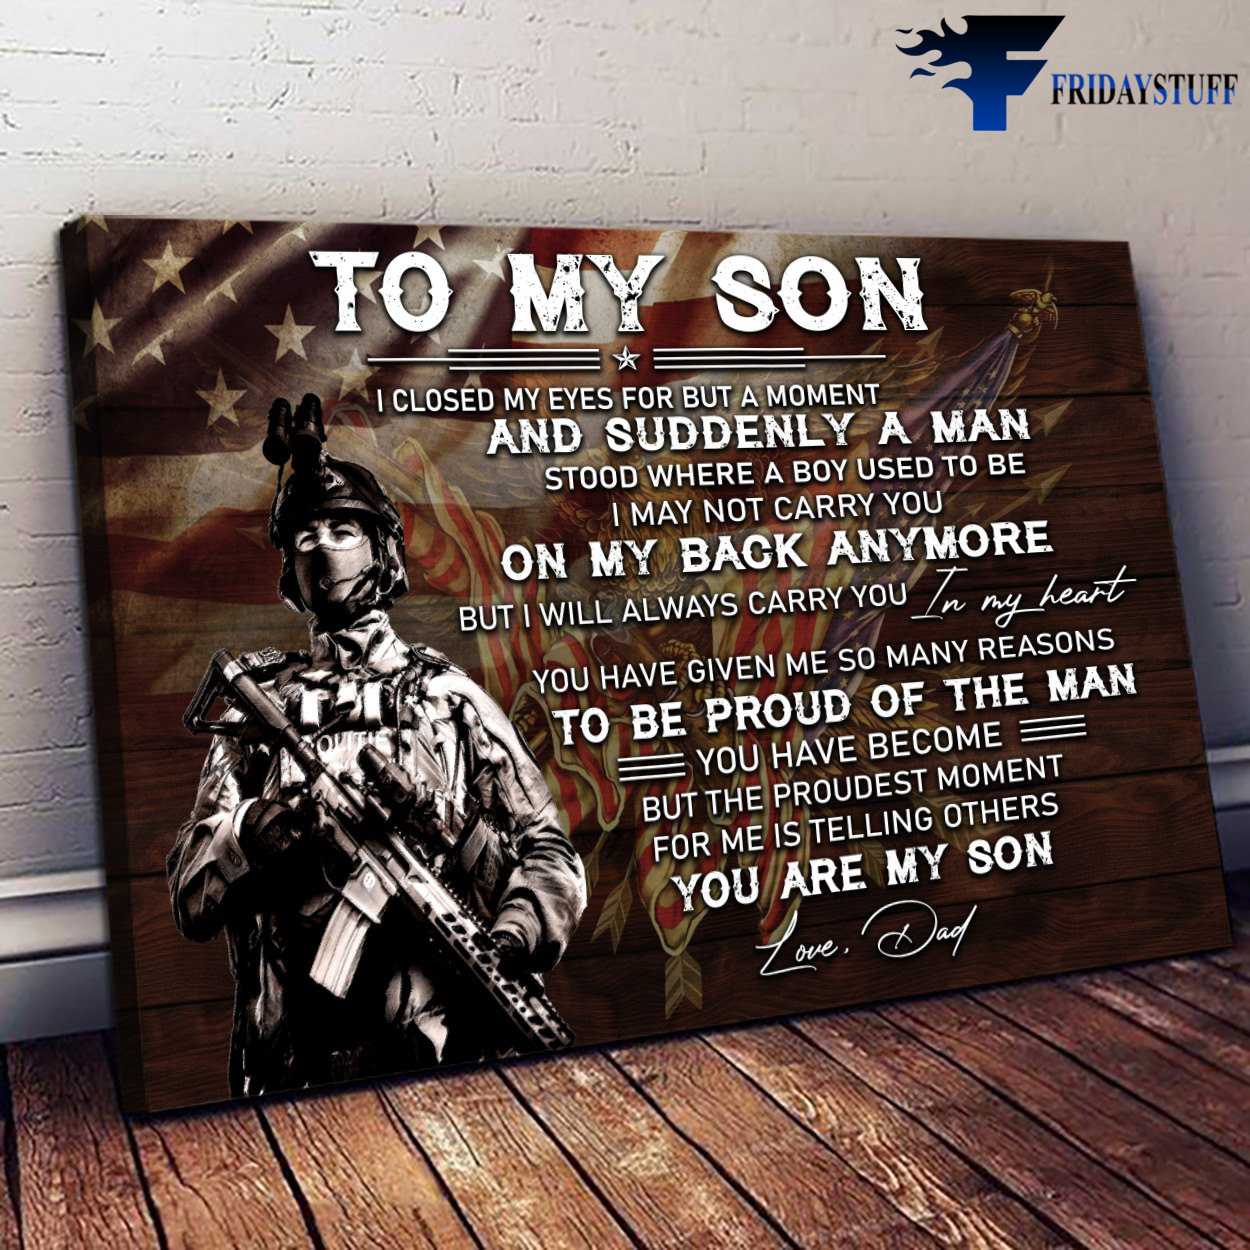 Soldier Poster, Dad And Son, To My Son, I Closed My Eyes For But A Moment, And Suddenly A Man, Stood Where A Boy Used To Be, I May Not Carry You, On My Back Anymore